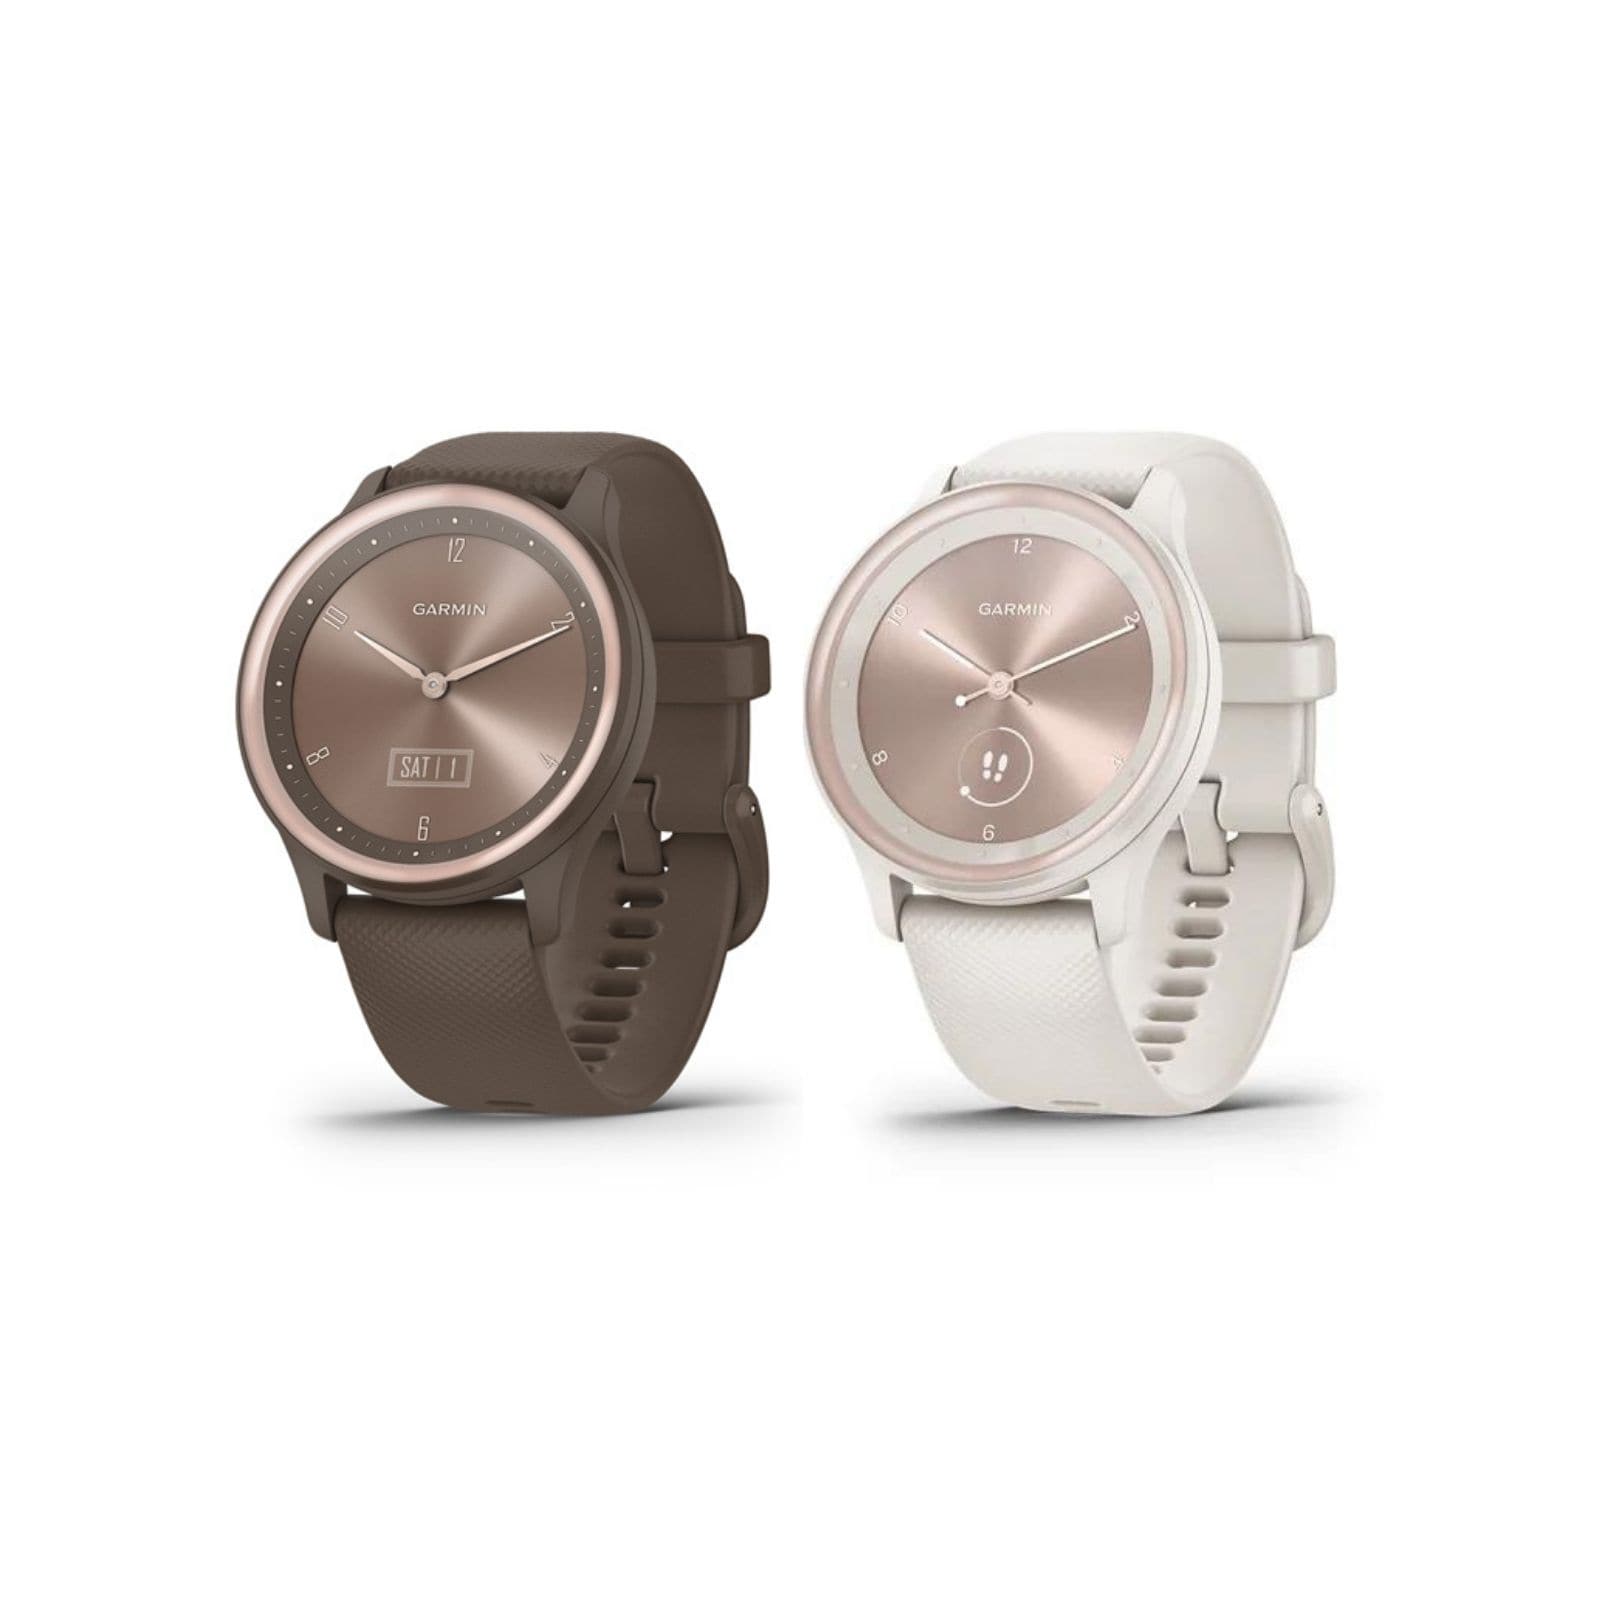 Garmin Vivoactive 5 - Price in India, Specifications & Features